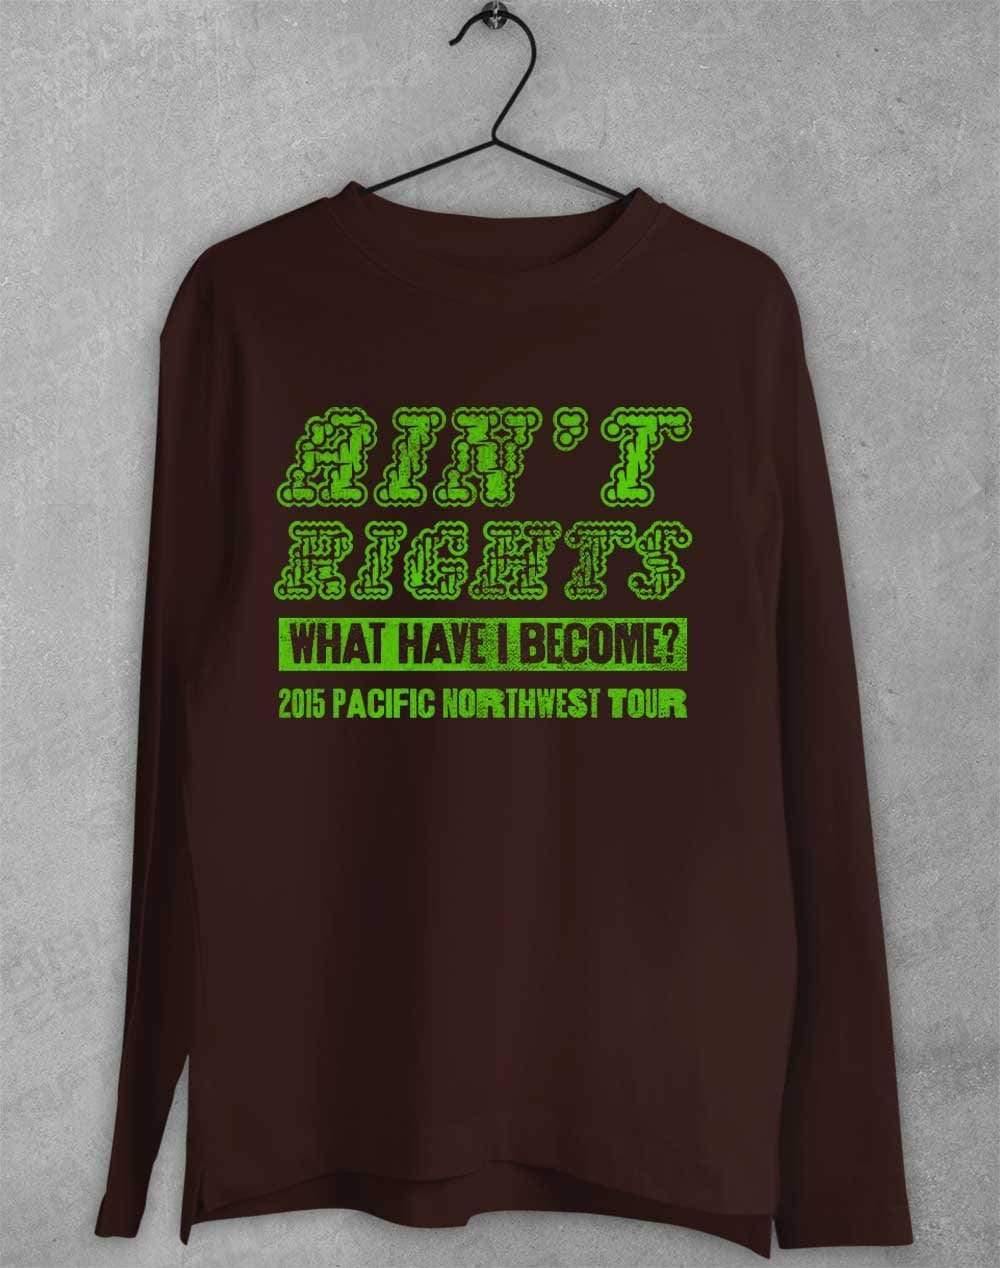 Ain't Rights 2015 Tour Long Sleeve T-Shirt S / Dark Chocolate  - Off World Tees